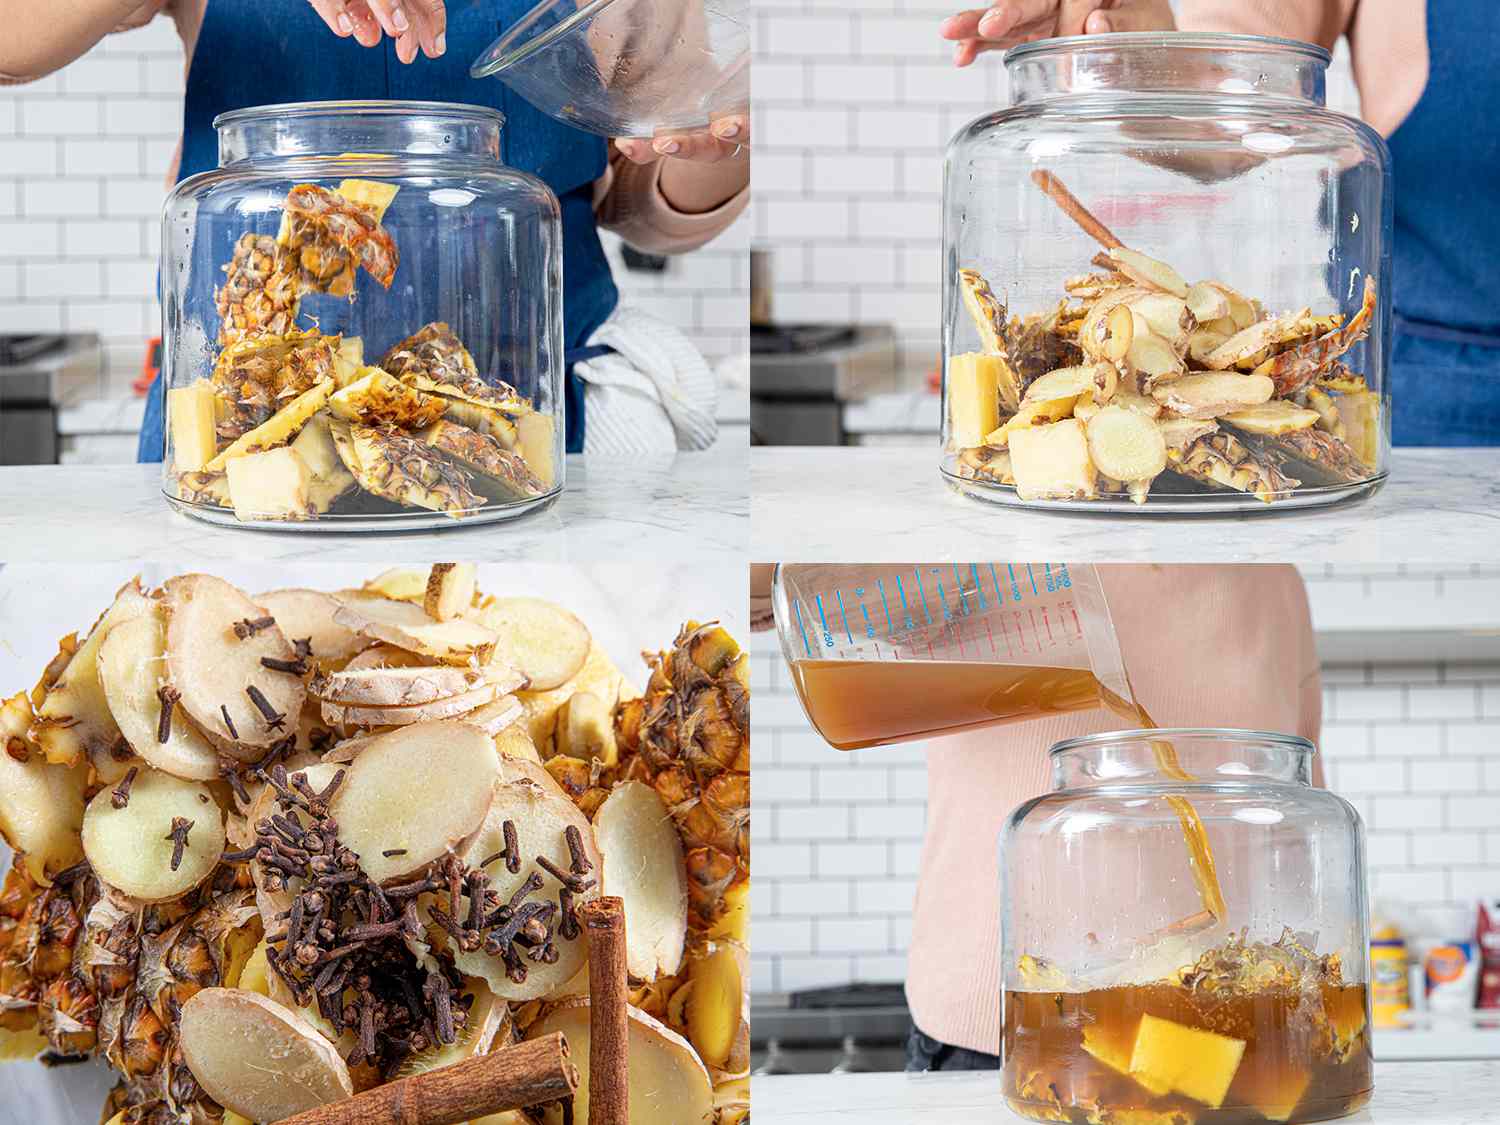 Four image collage of pineapple, ginger, and sugar mixture being added to a gallon jug